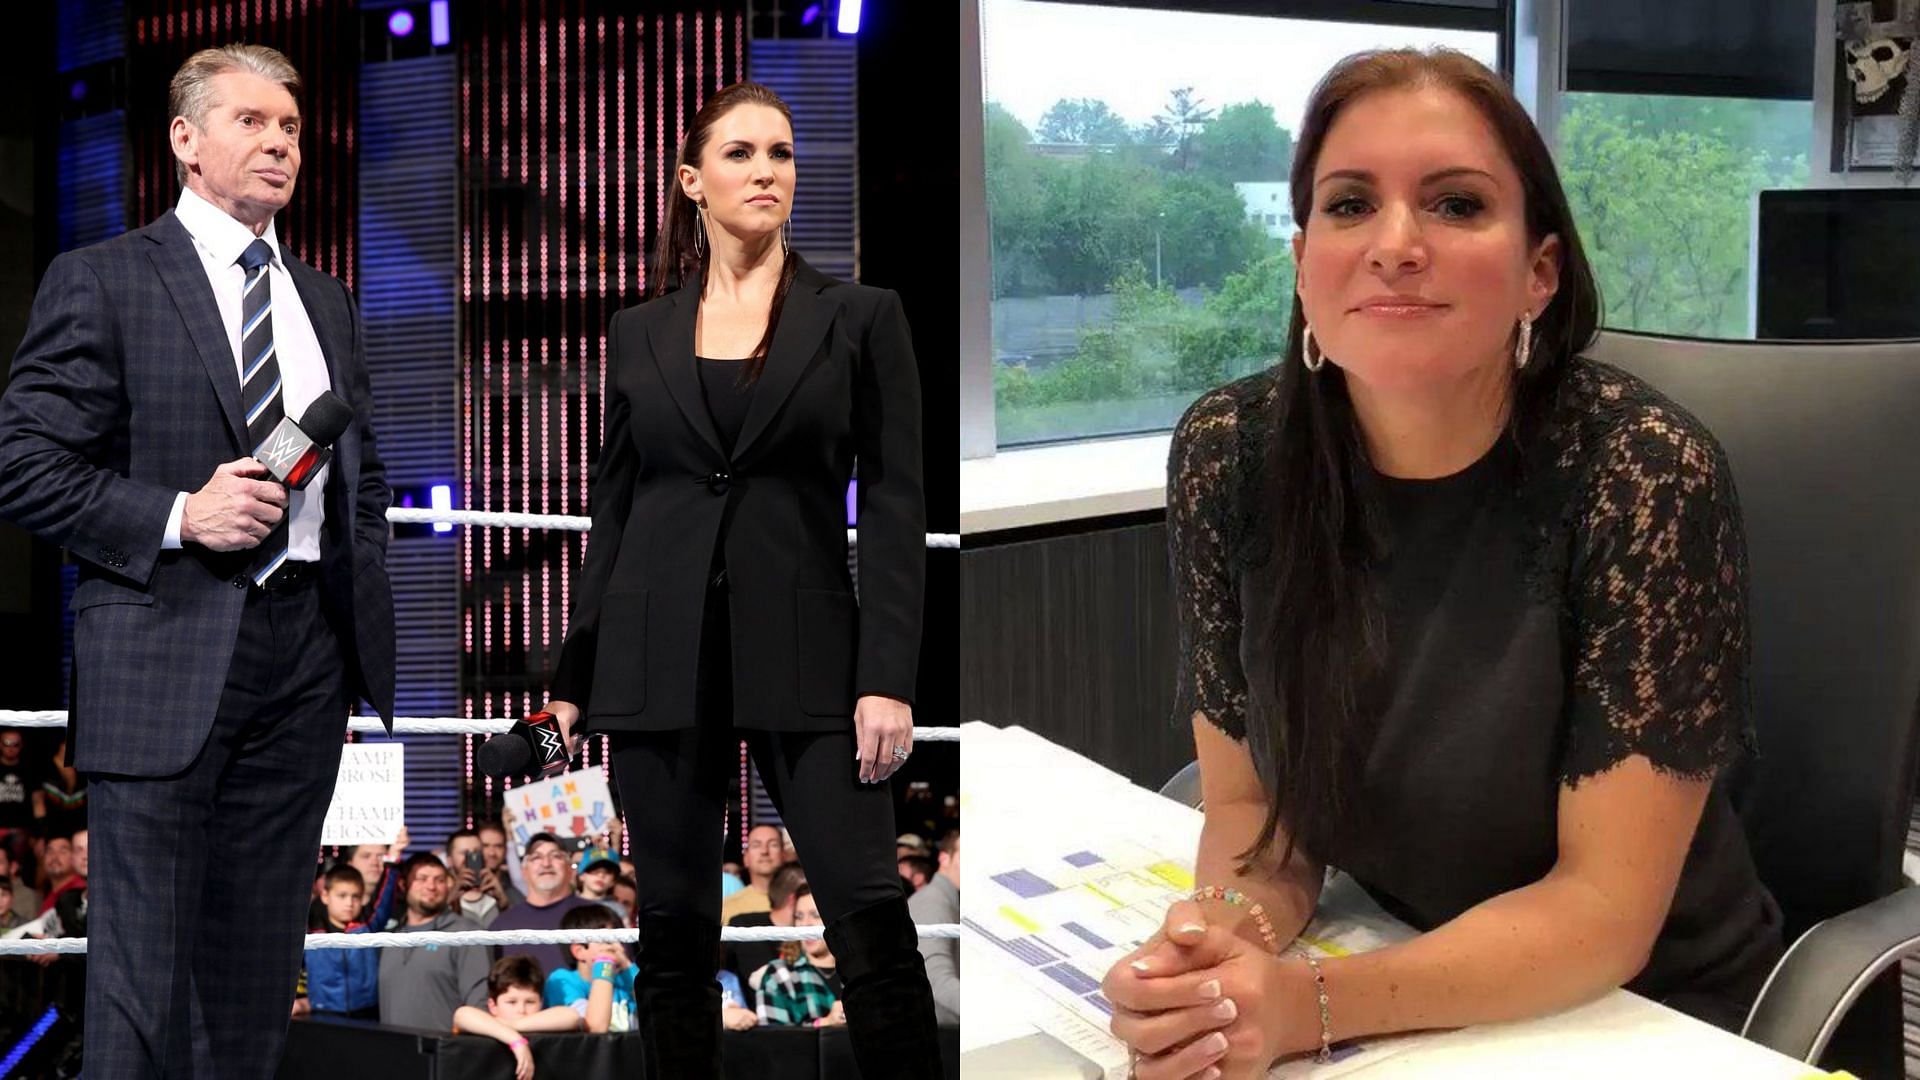 Stephanie McMahon worked in several positions in WWE